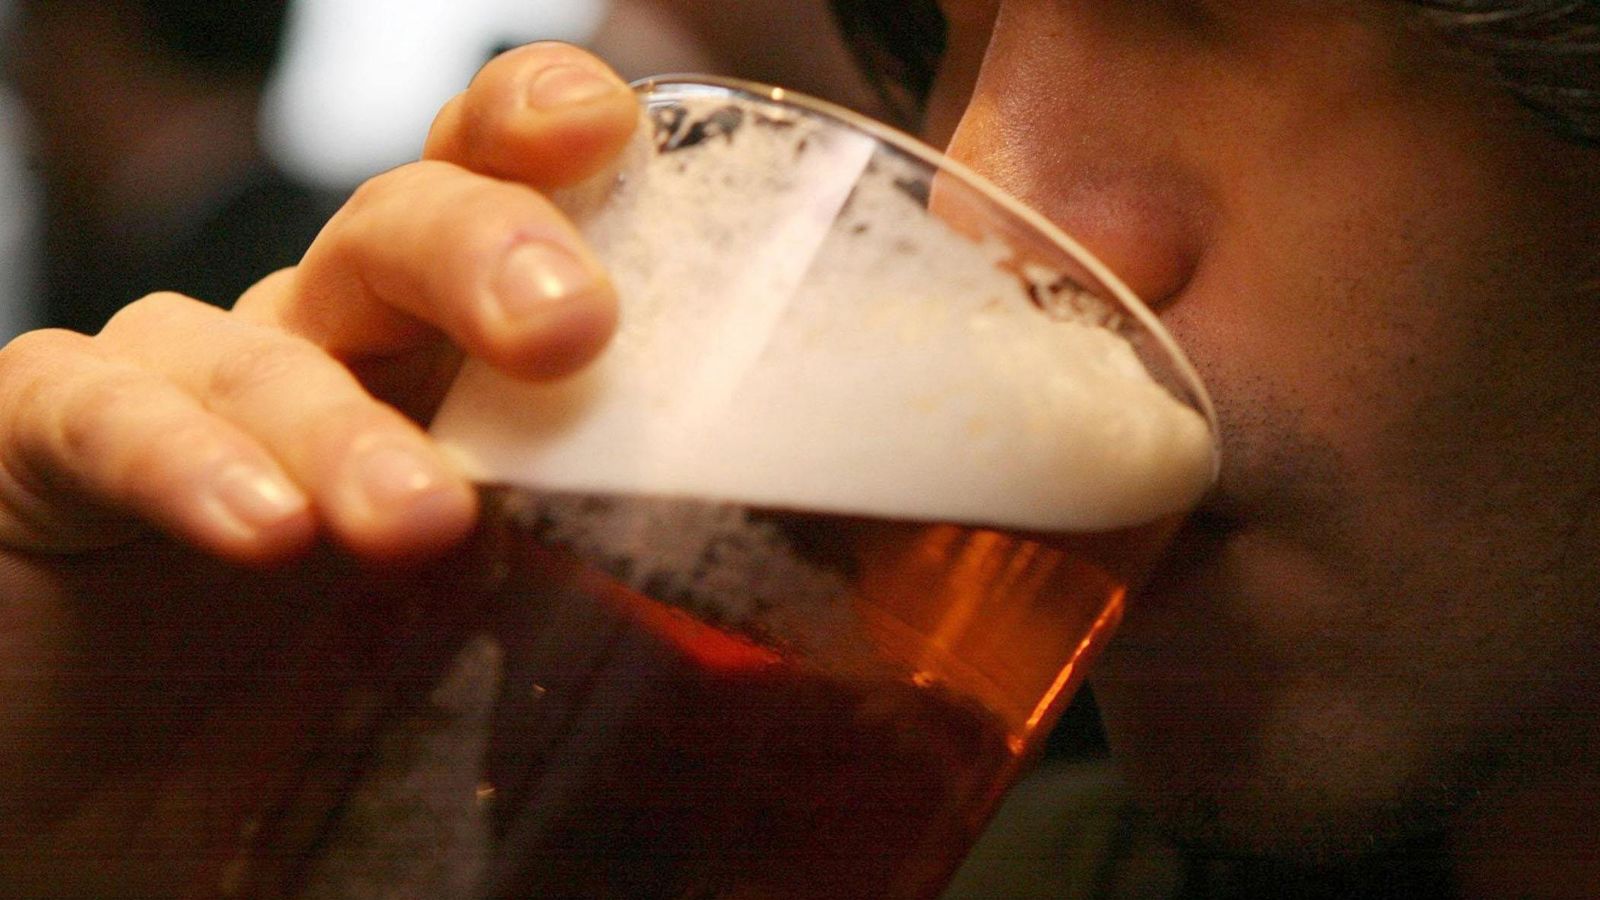 Study Shows Availability of Alcohol-Free Beer on Draught in Pubs and Bars Can Lead to Increased Sales and Healthier Choices